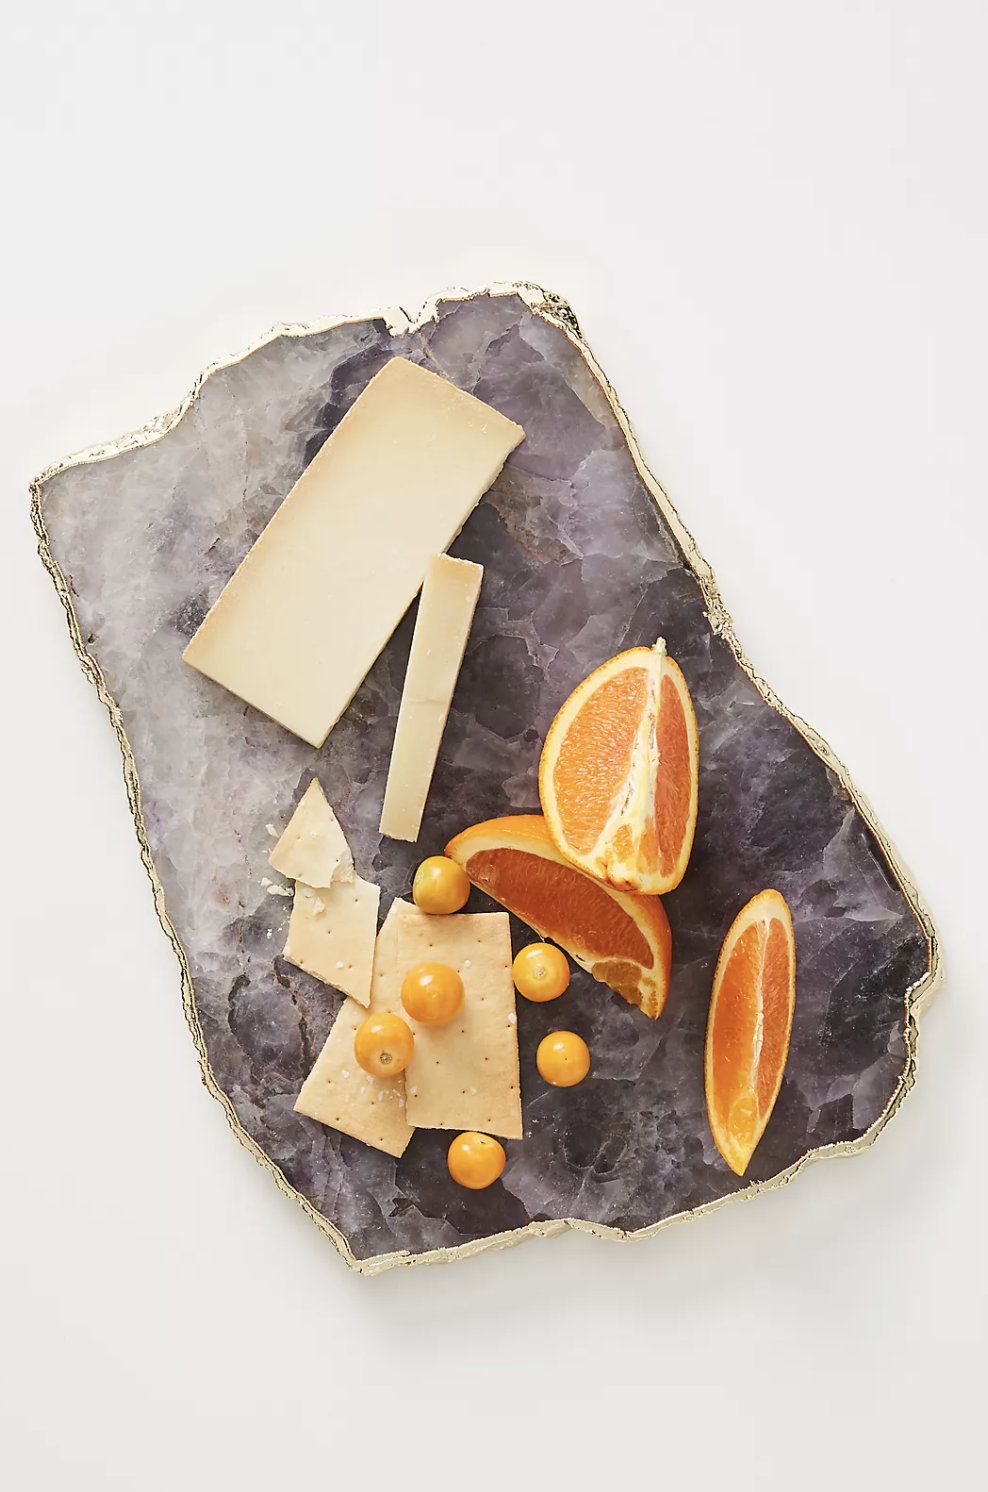 An image of the cheese board